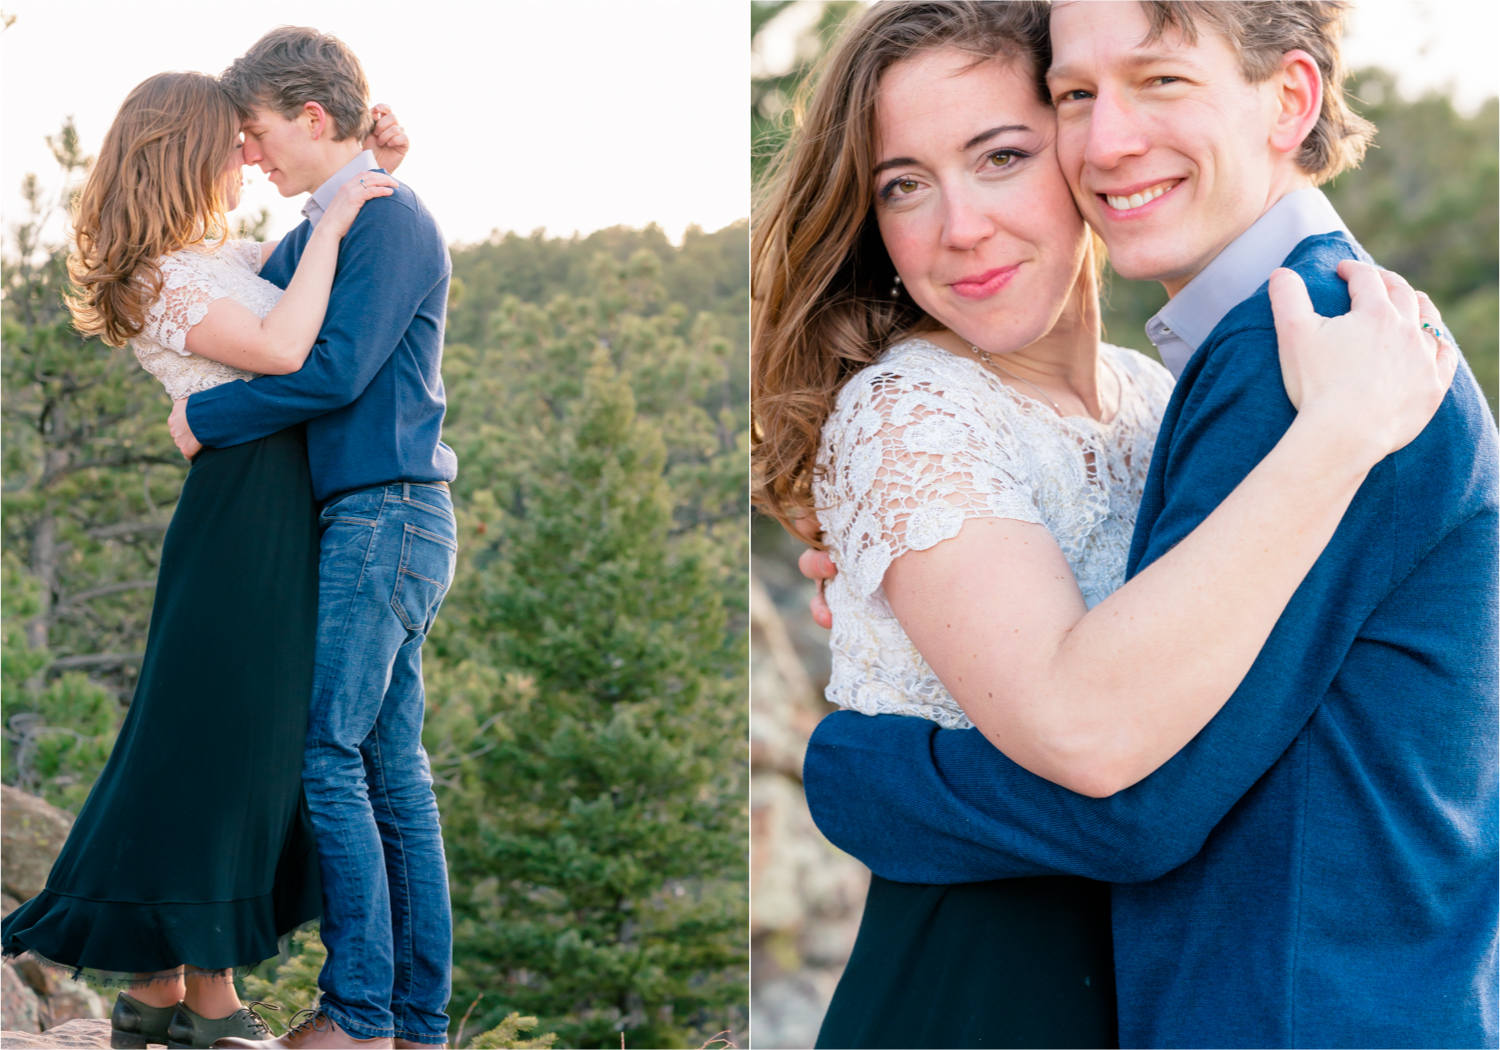 Winter Engagement on Lookout Mountain in Golden Colorado | Britni Girard Photography | Destination Photo and Video Team | Epic views of Golden, dreamy sunsets, dancing and snuggles.  A sweet couple shares time of prayer together during their romantic engagement session.